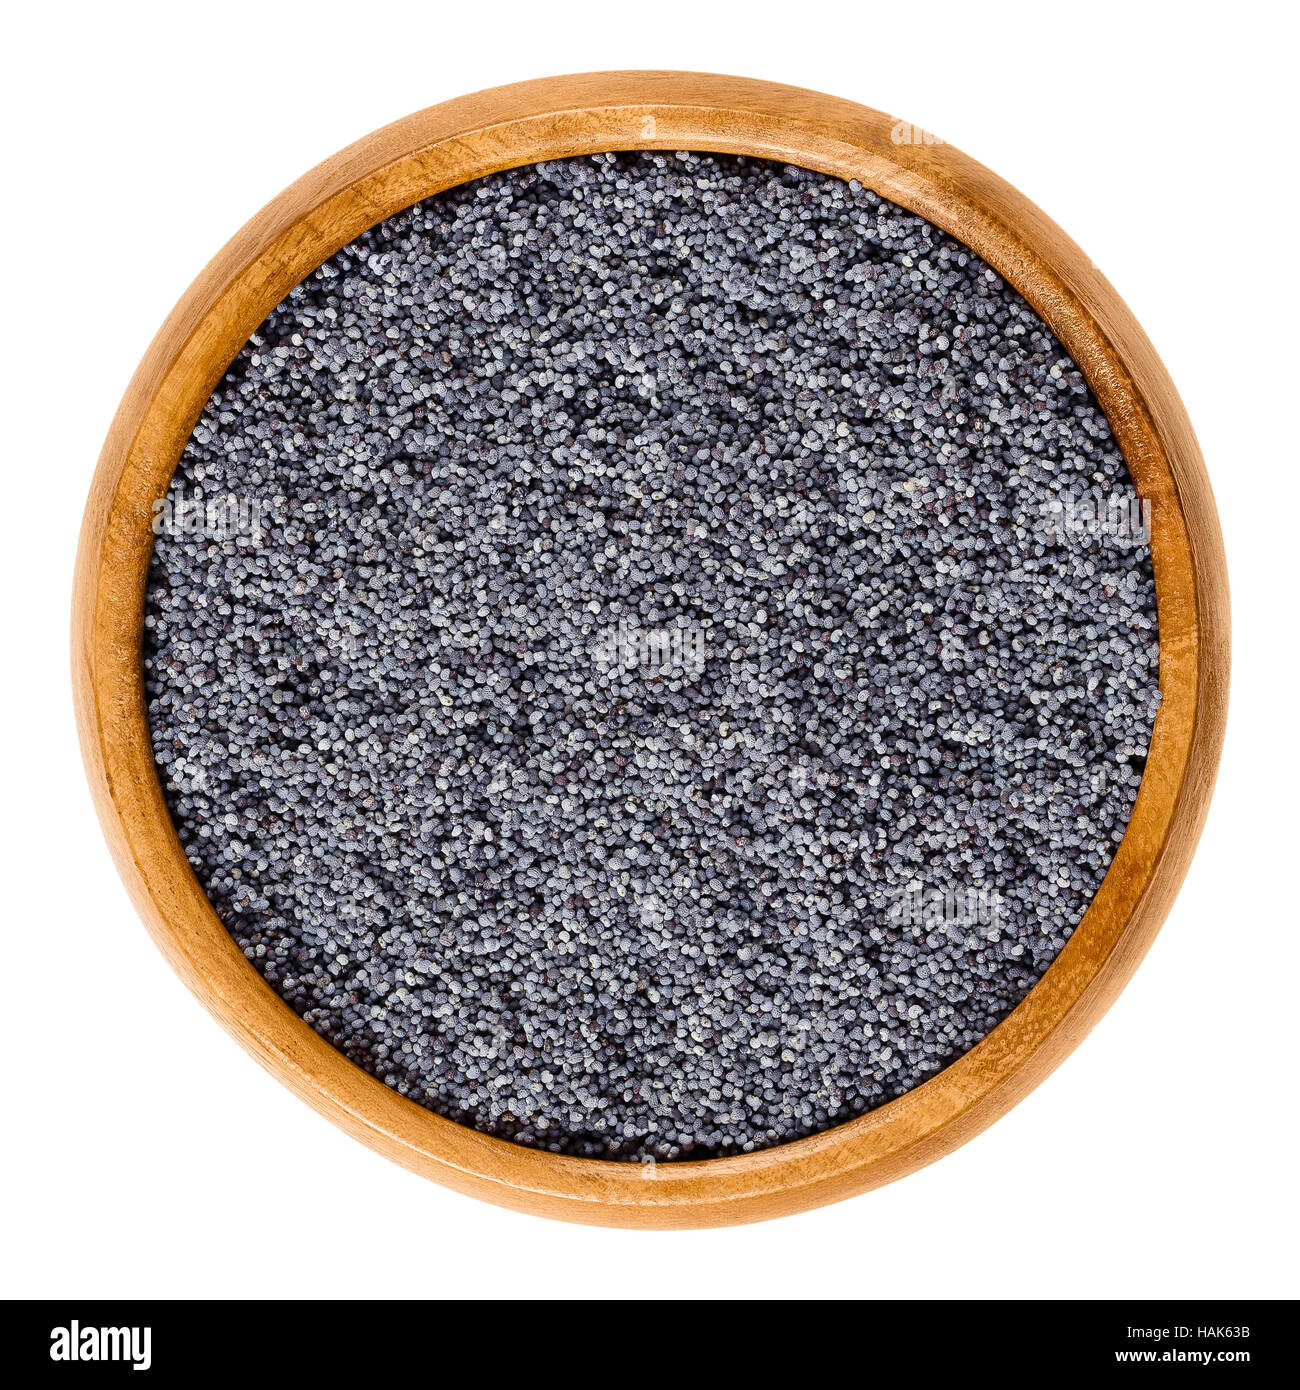 Blue poppy seeds in wooden bowl. Oilseed from opium poppy Paper somniferum with tiny kidney shaped seeds. Dried fruits. Stock Photo